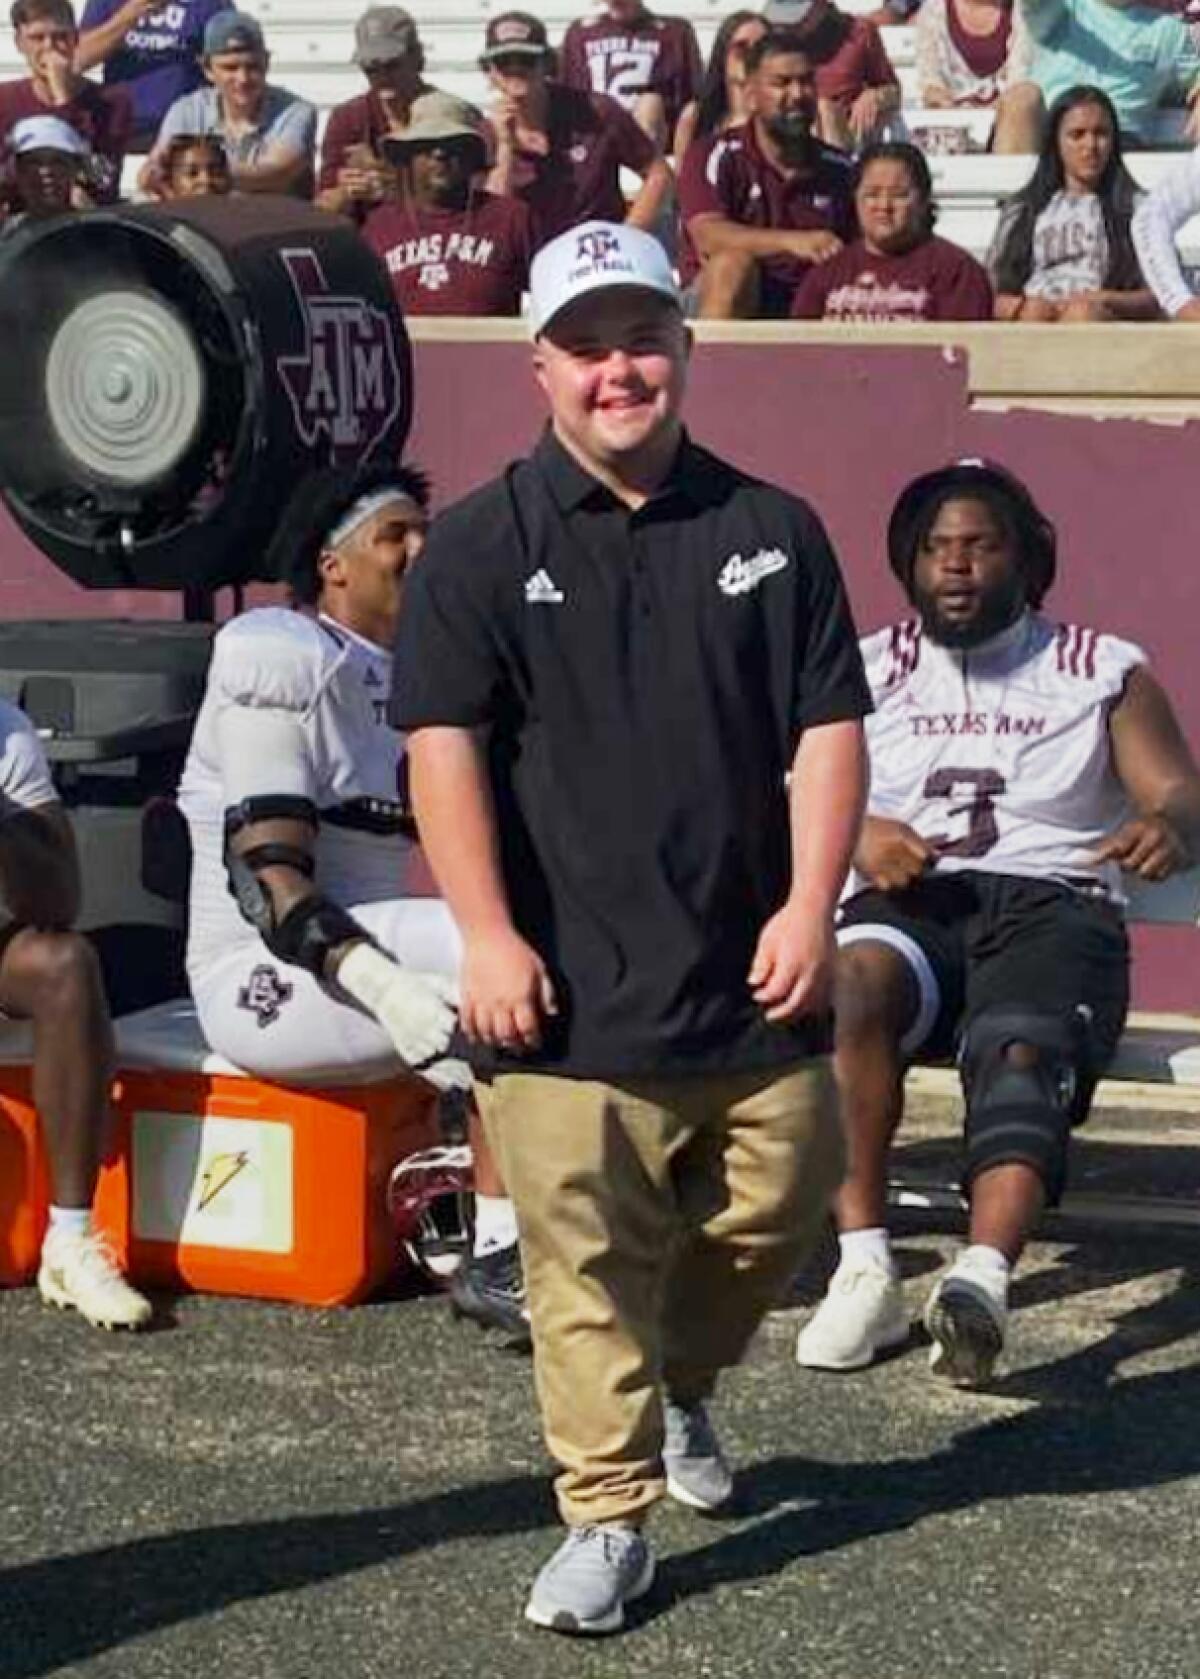 In a vertical frame, Caden Cox poses for a photo standing on a football field with players and fans in stands behind him.